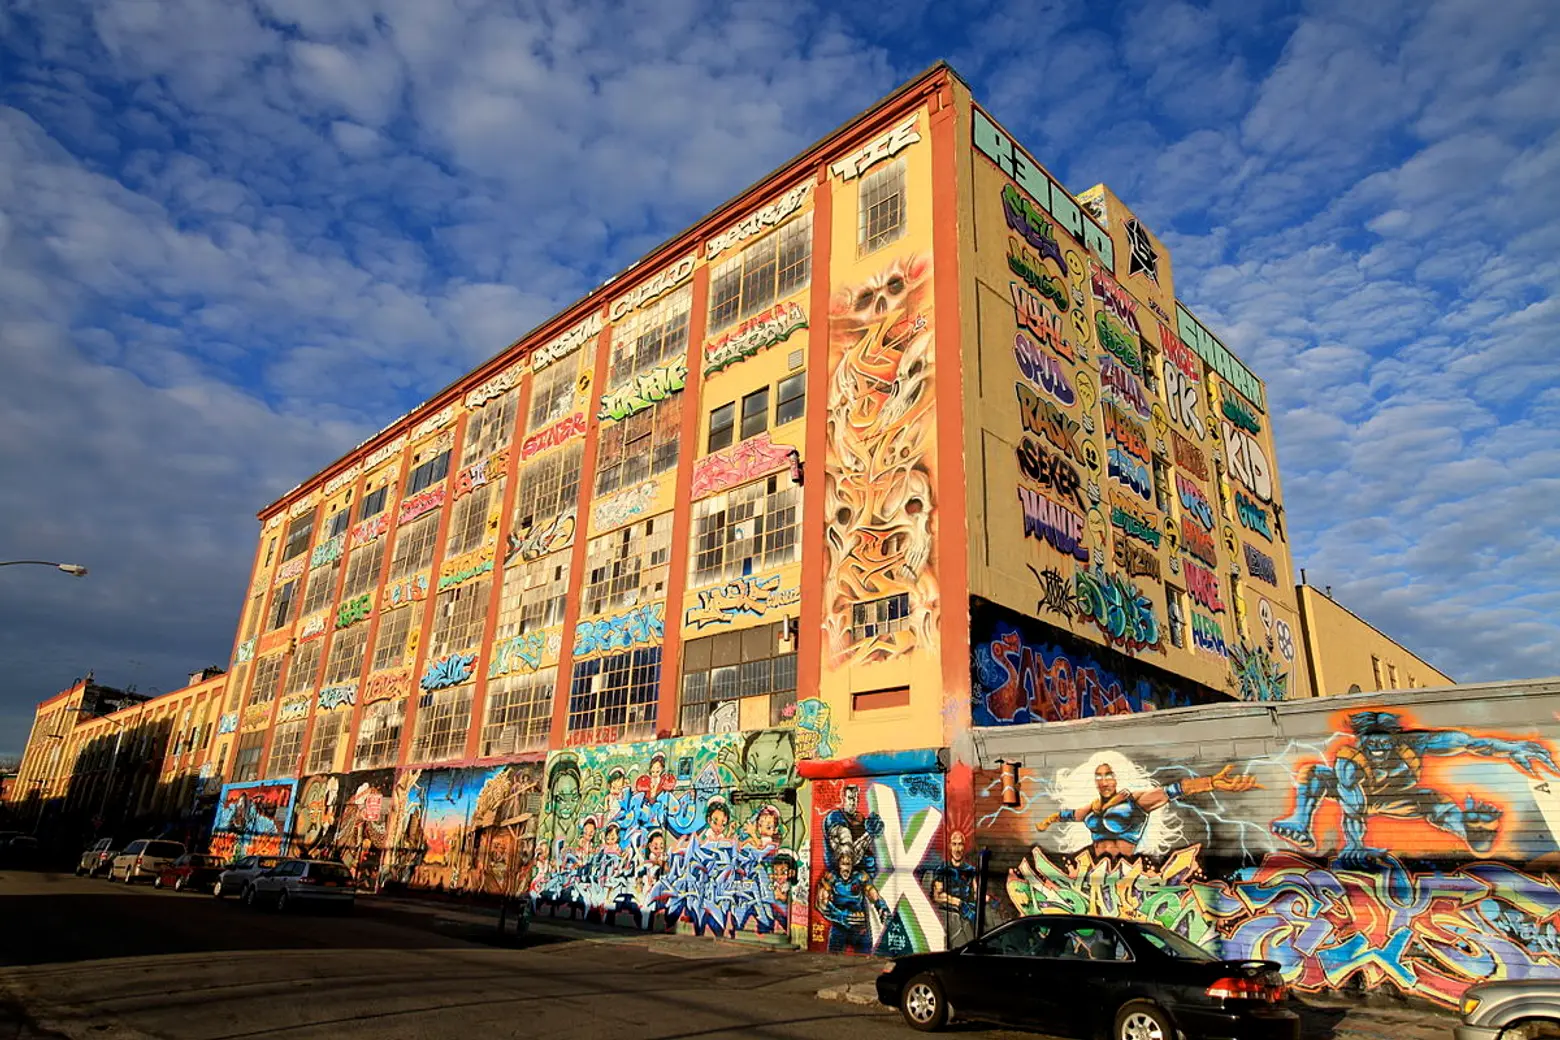 5Pointz graffiti artists whose work was destroyed will get a chance to face developer in court